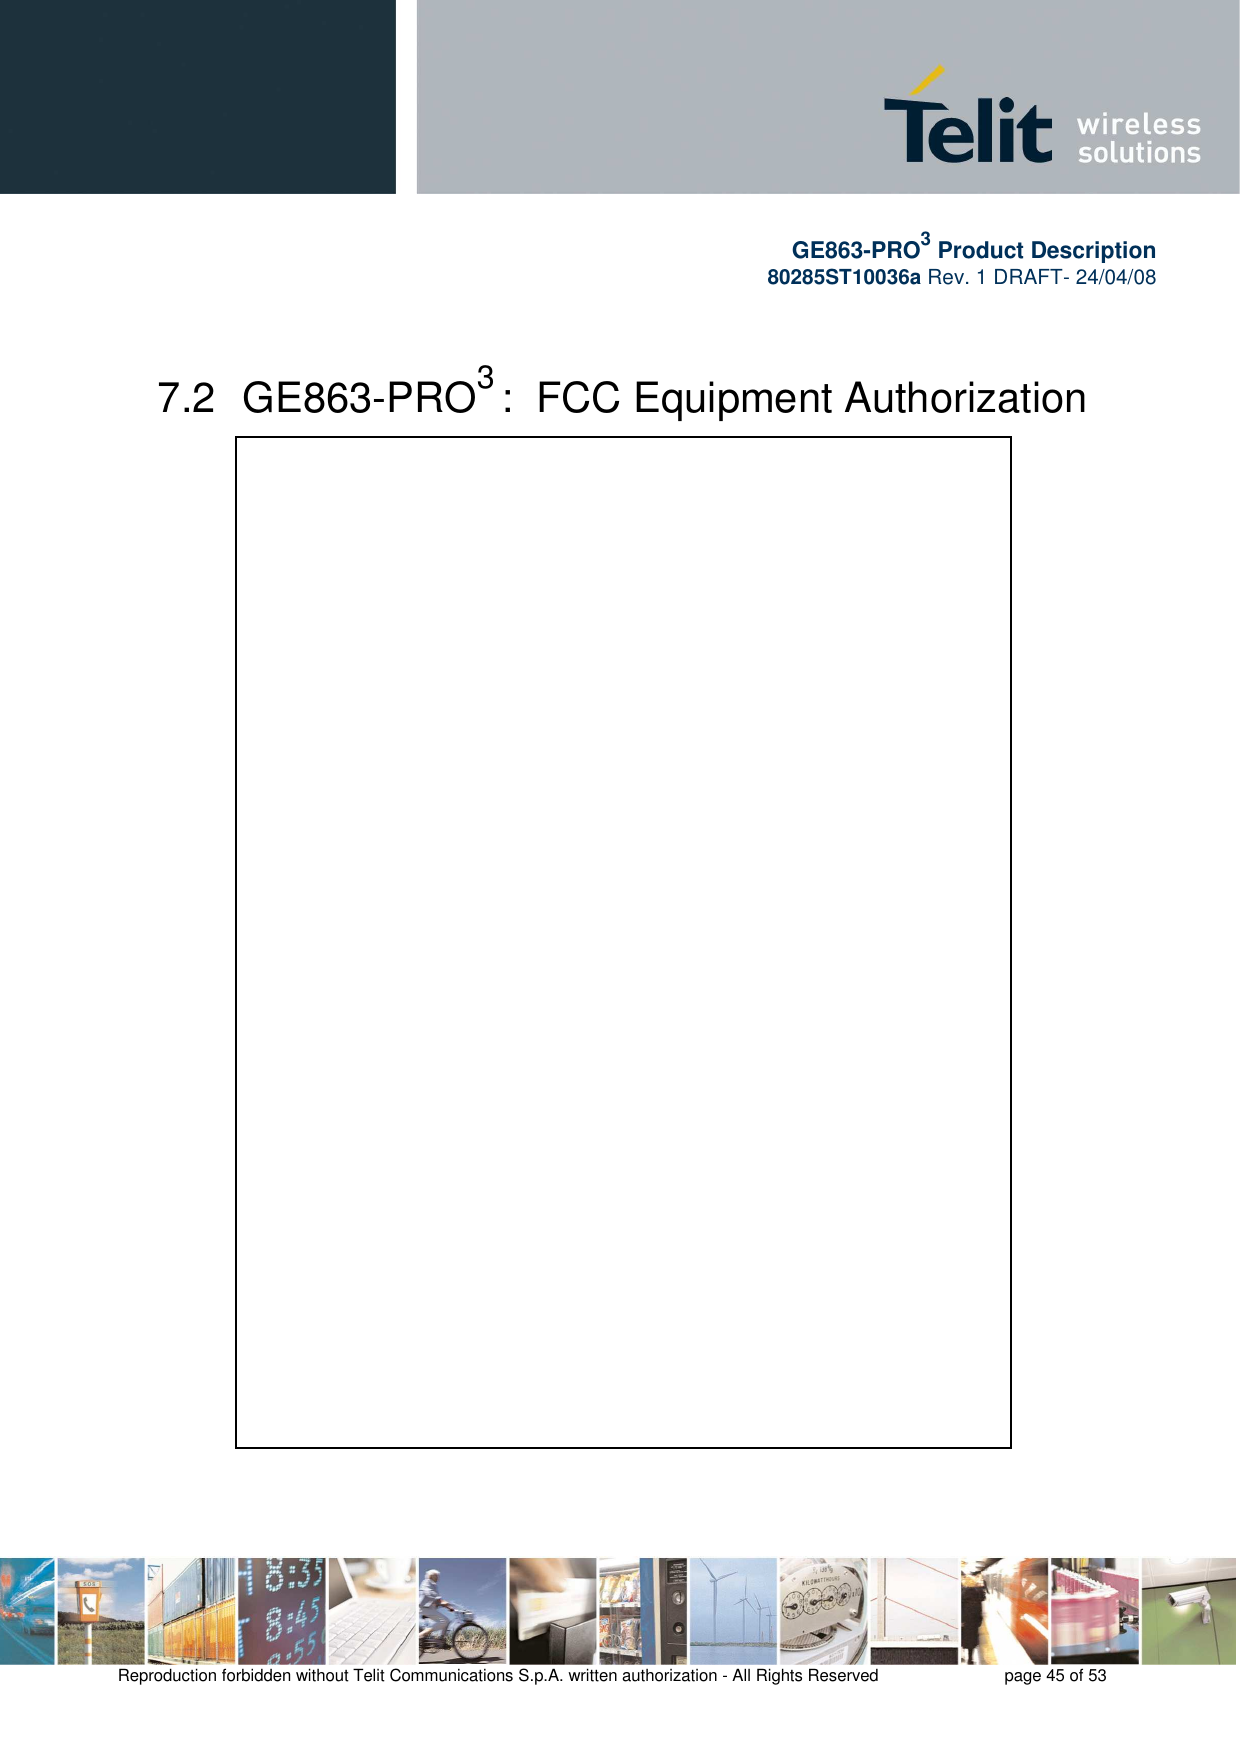       GE863-PRO3 Product Description 80285ST10036a Rev. 1 DRAFT- 24/04/08    Reproduction forbidden without Telit Communications S.p.A. written authorization - All Rights Reserved    page 45 of 53   7.2  GE863-PRO3 :  FCC Equipment Authorization 